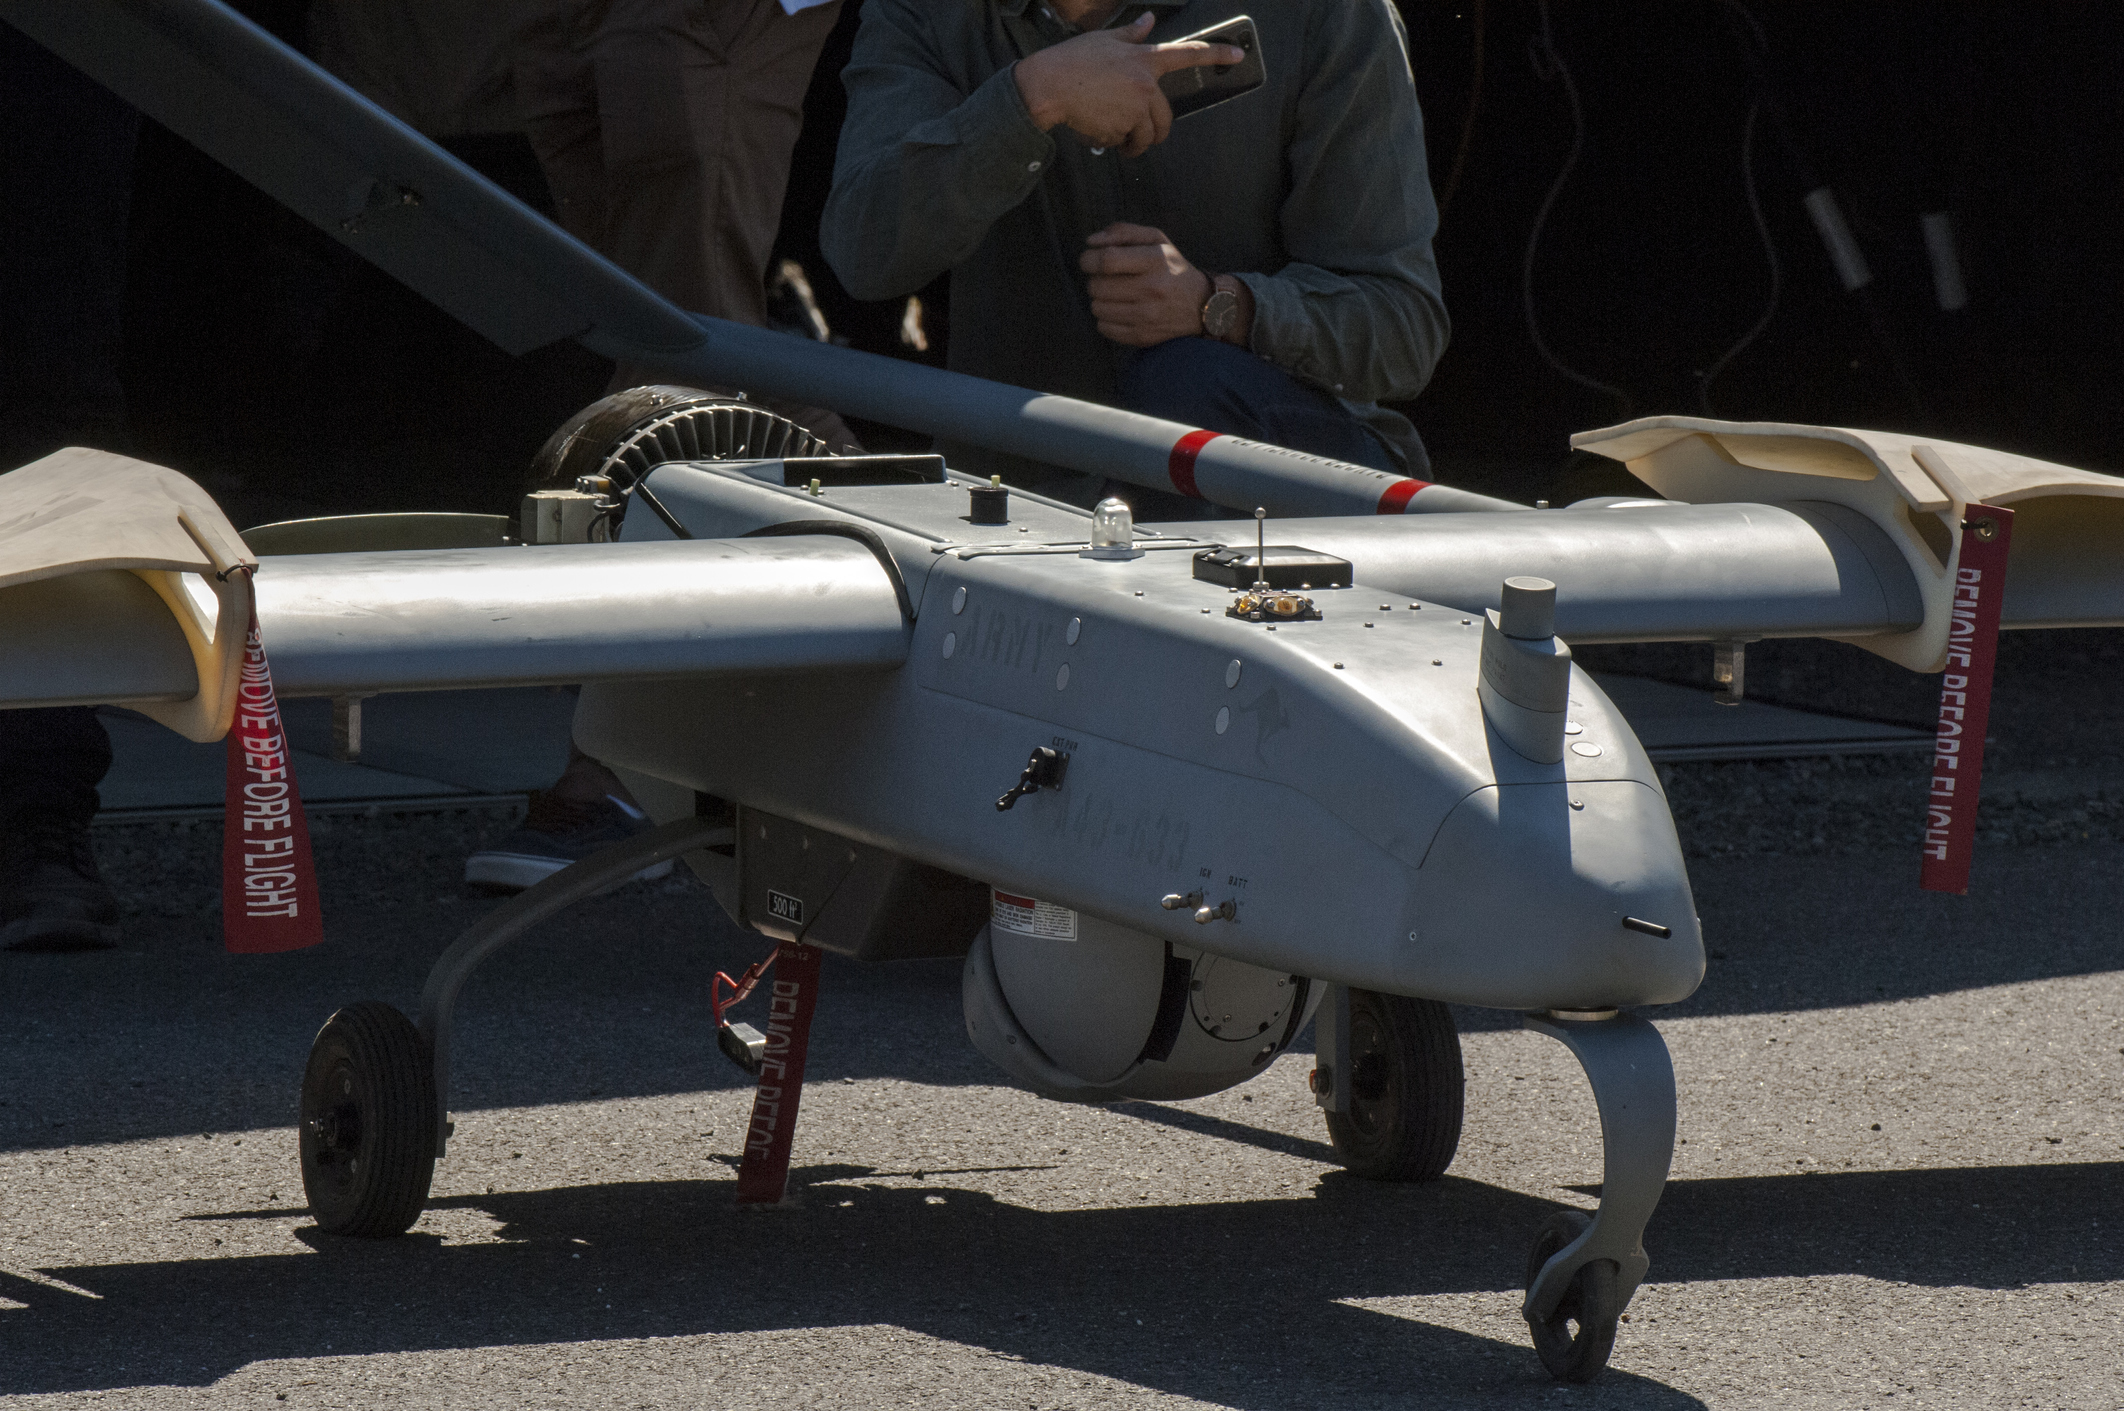 Silentium Defence to trial passive radar technology on drones